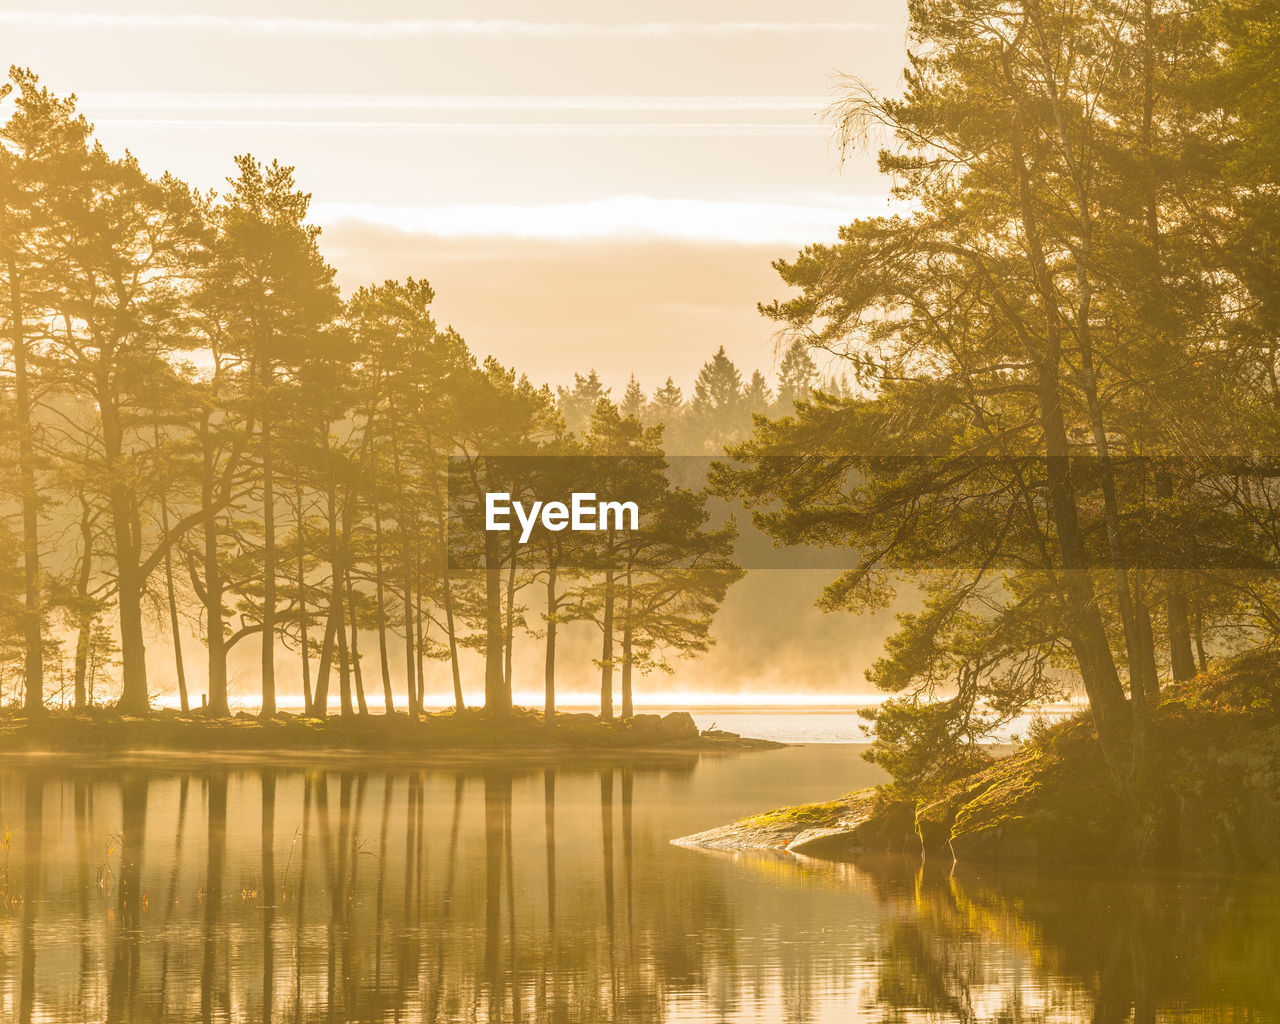 A peaceful sunrise in a swedish forest, with sun rays reflecting off the lake and fog 